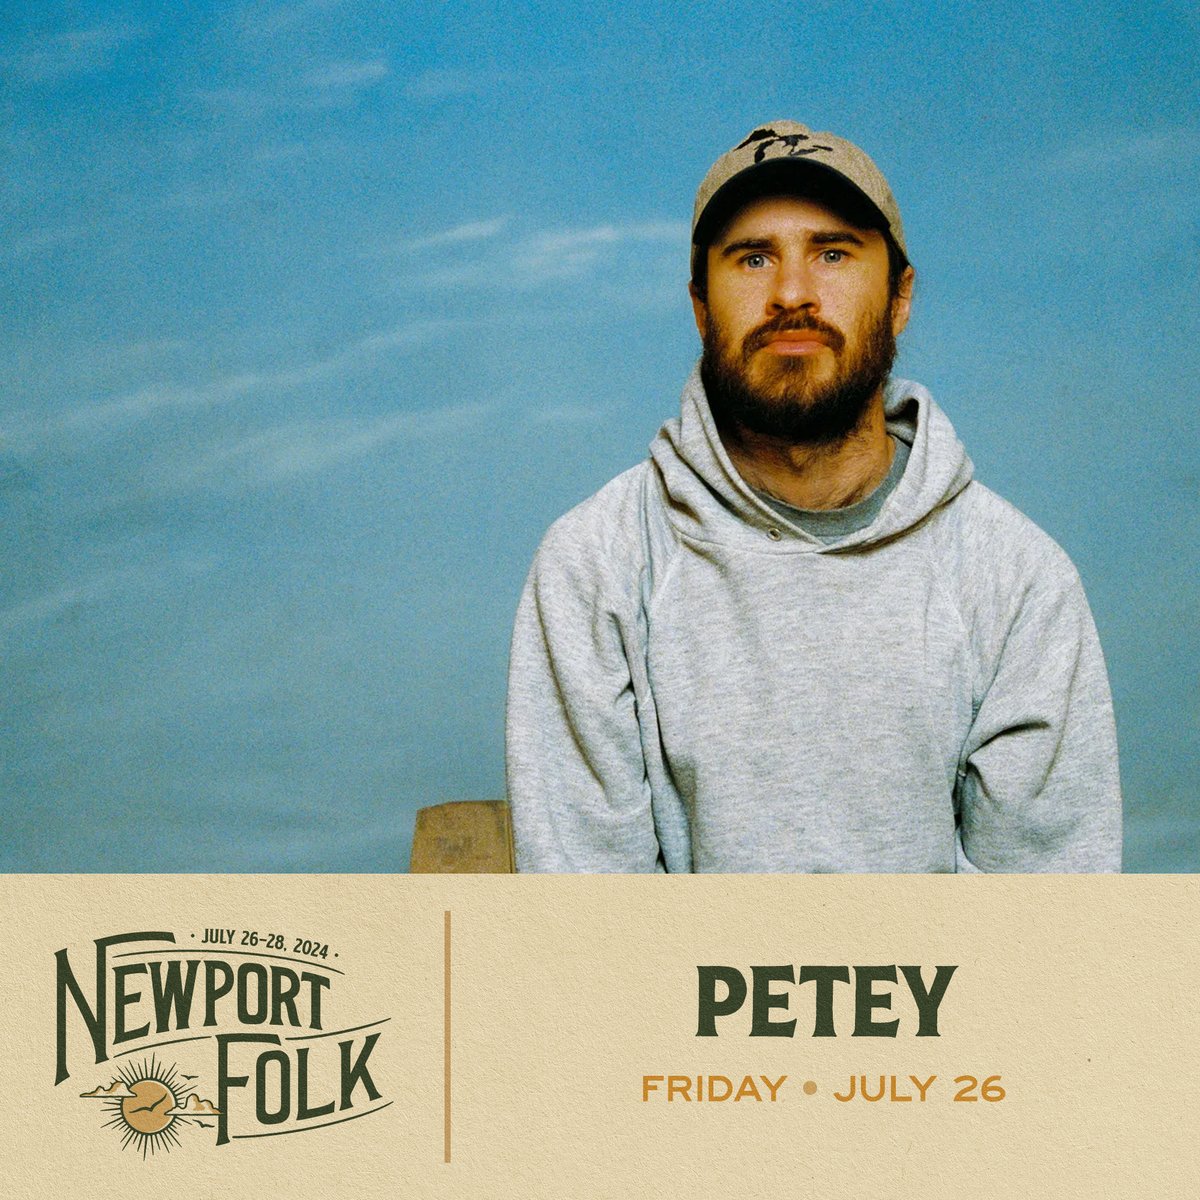 We can't wait for Petey to join us at the Fort this summer! 💥 @newportfestsorg has provided a grant to @PeoplesMusicSch, which offers high quality, tuition-free music education to school aged children in Chicago who would otherwise not be able to afford it.